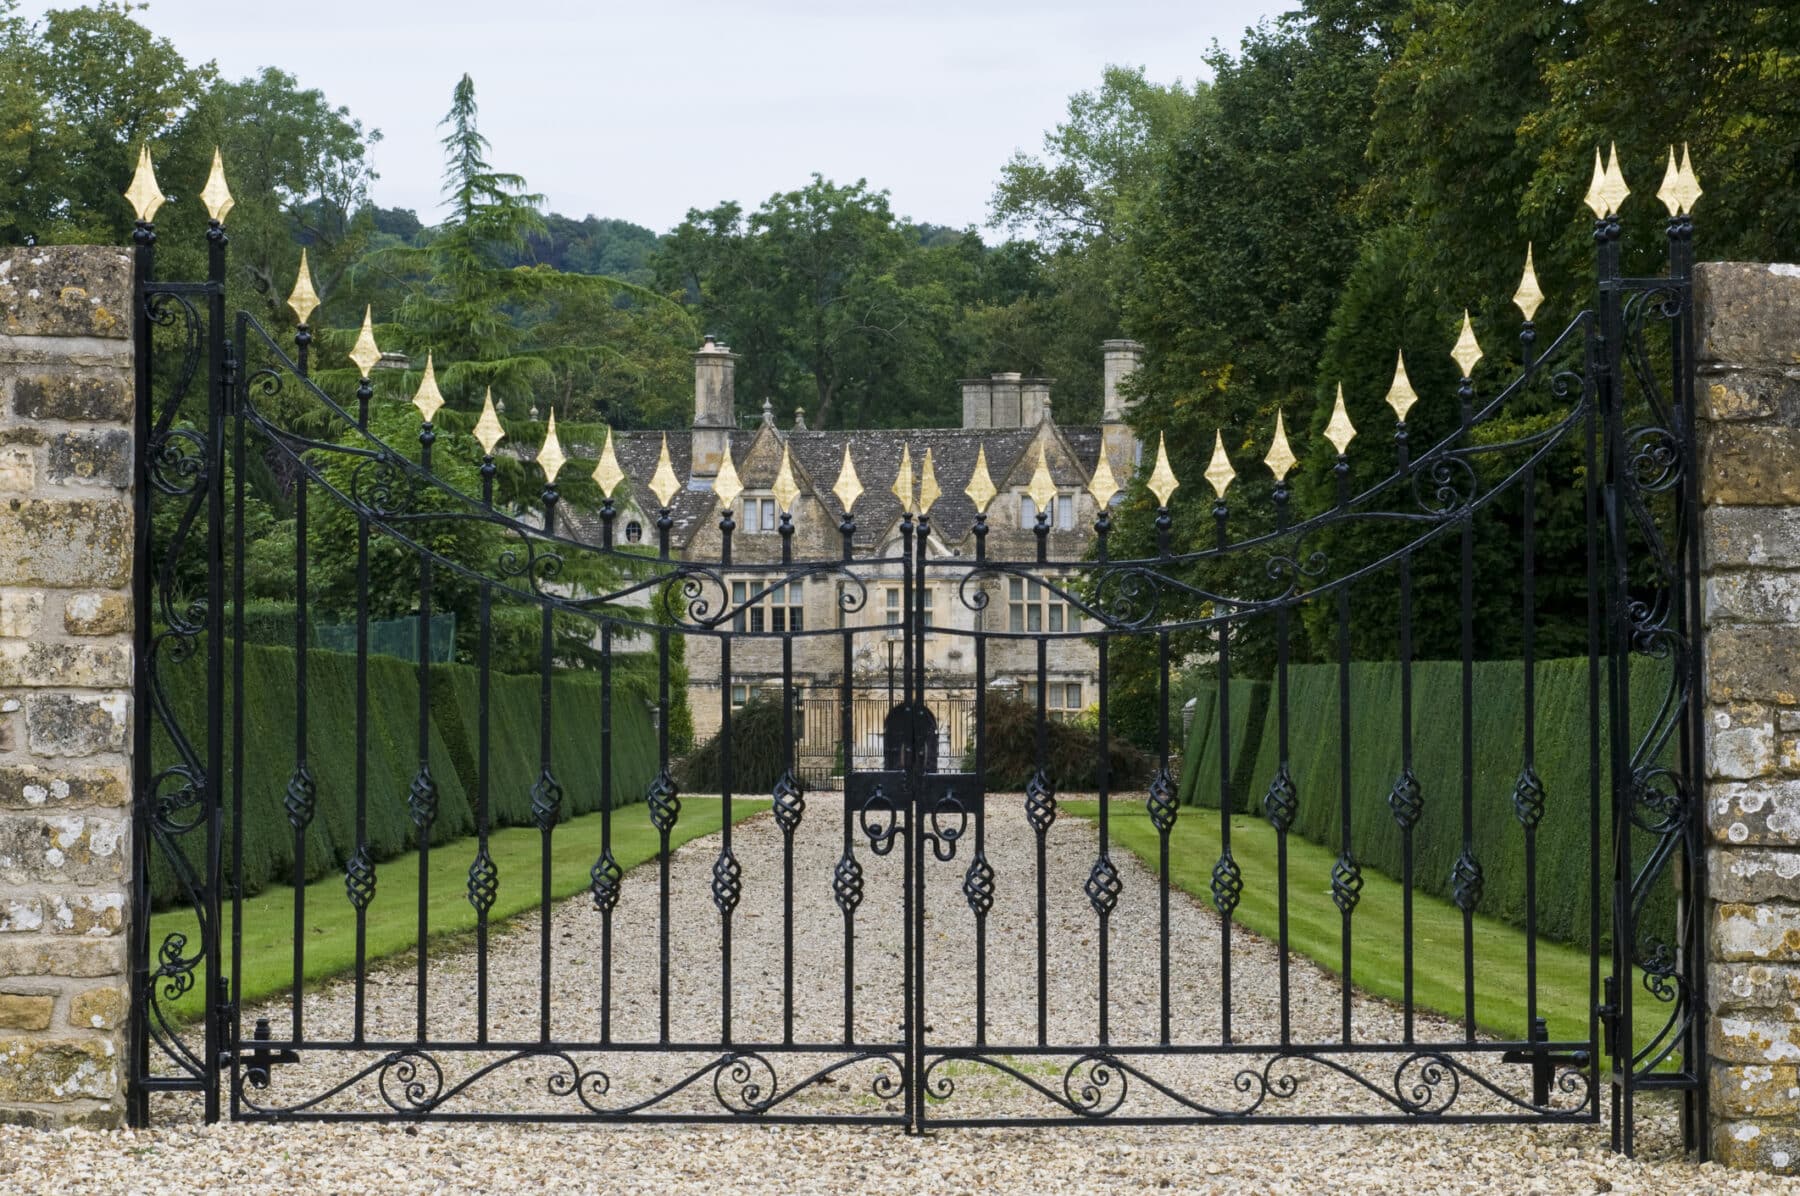 Ornate iron gate with historic manor house background.